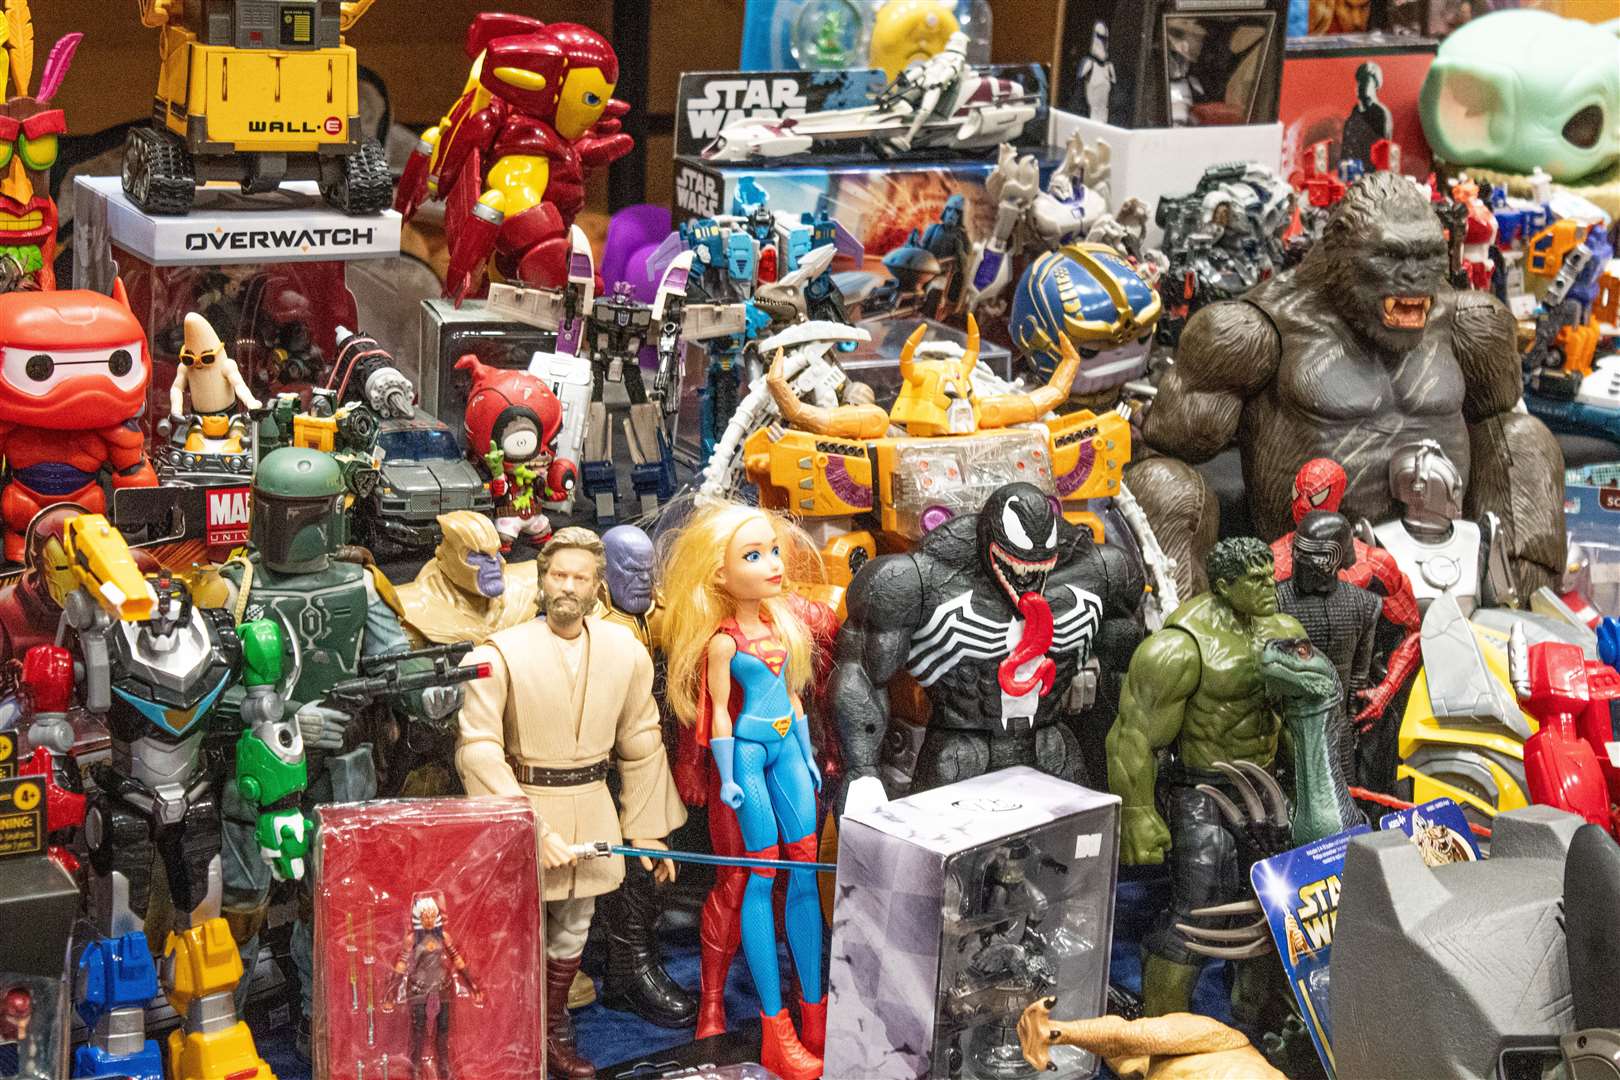 Vintage toys were on sale among a range of affordable trade items. Photo: Niall Harkiss